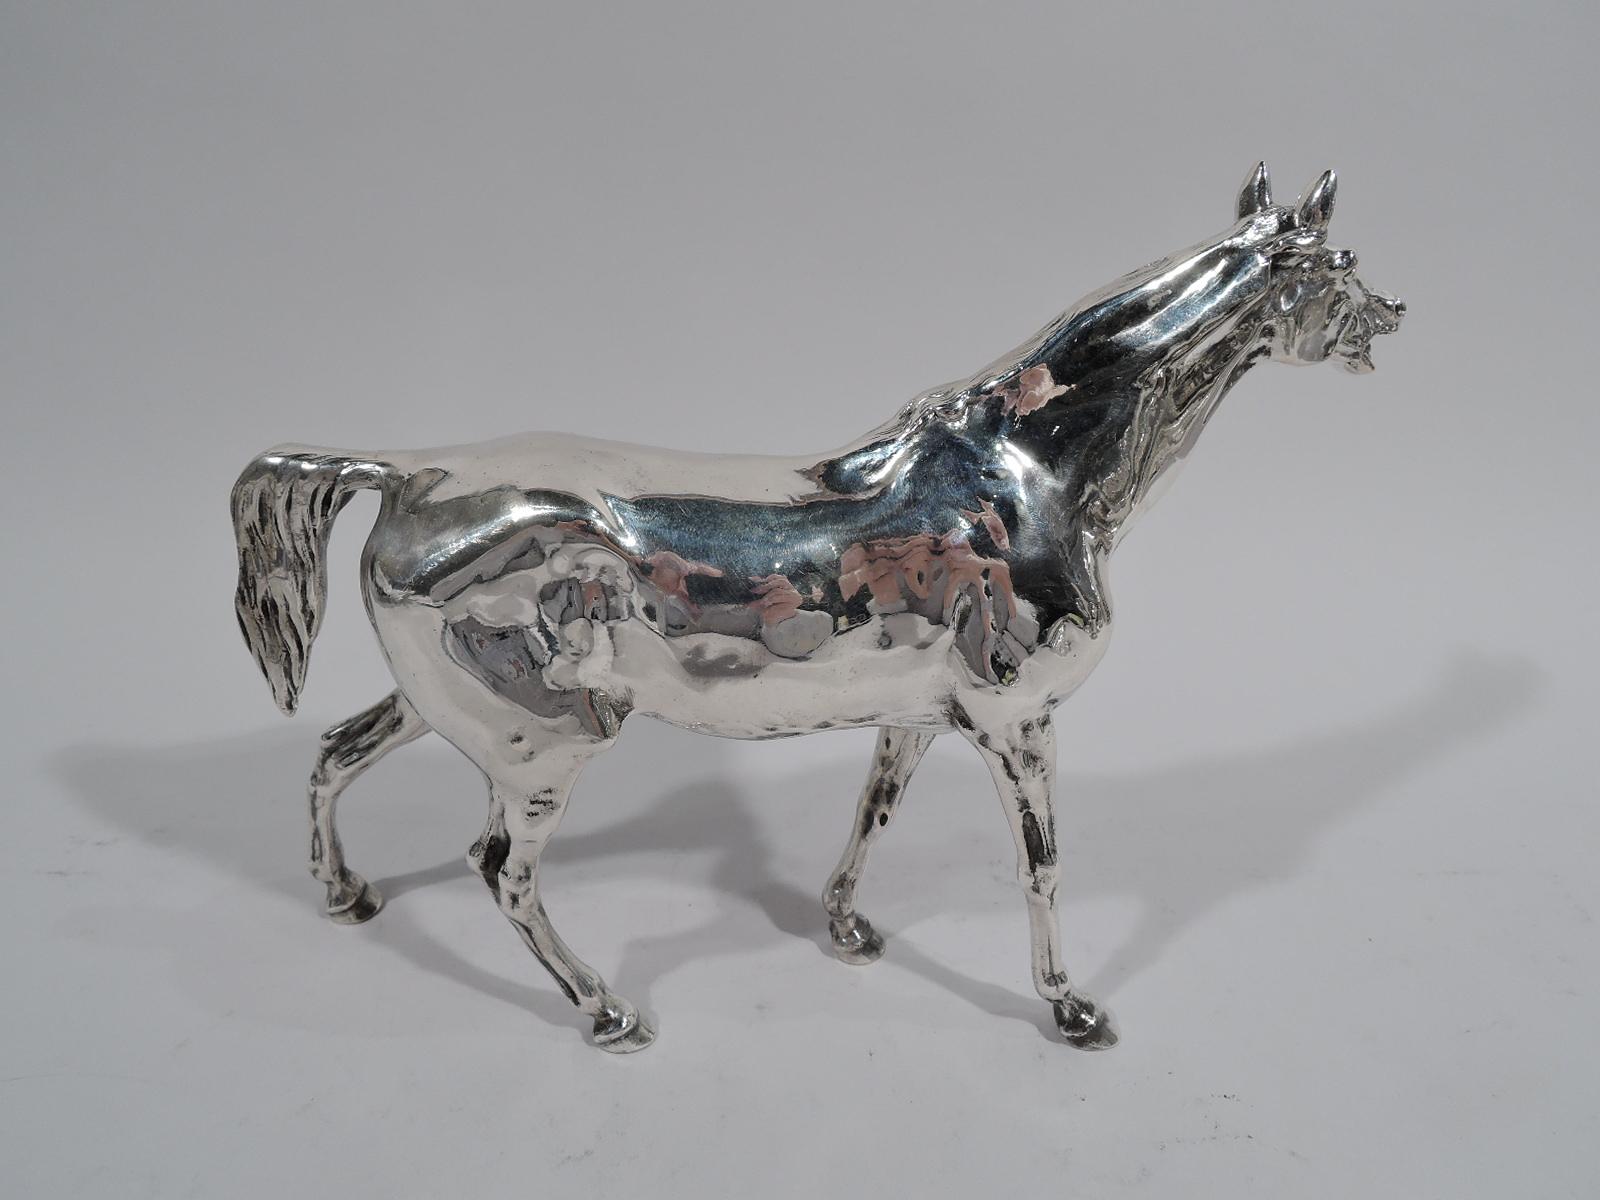 German 800 silver horse figure, circa 1910. An elegant animal with taut, muscular body, sturdy legs, and groomed mane and tail. Alert expression with erect ears and gaping mouth. Marked on hoof. Weight: 16 troy ounces.